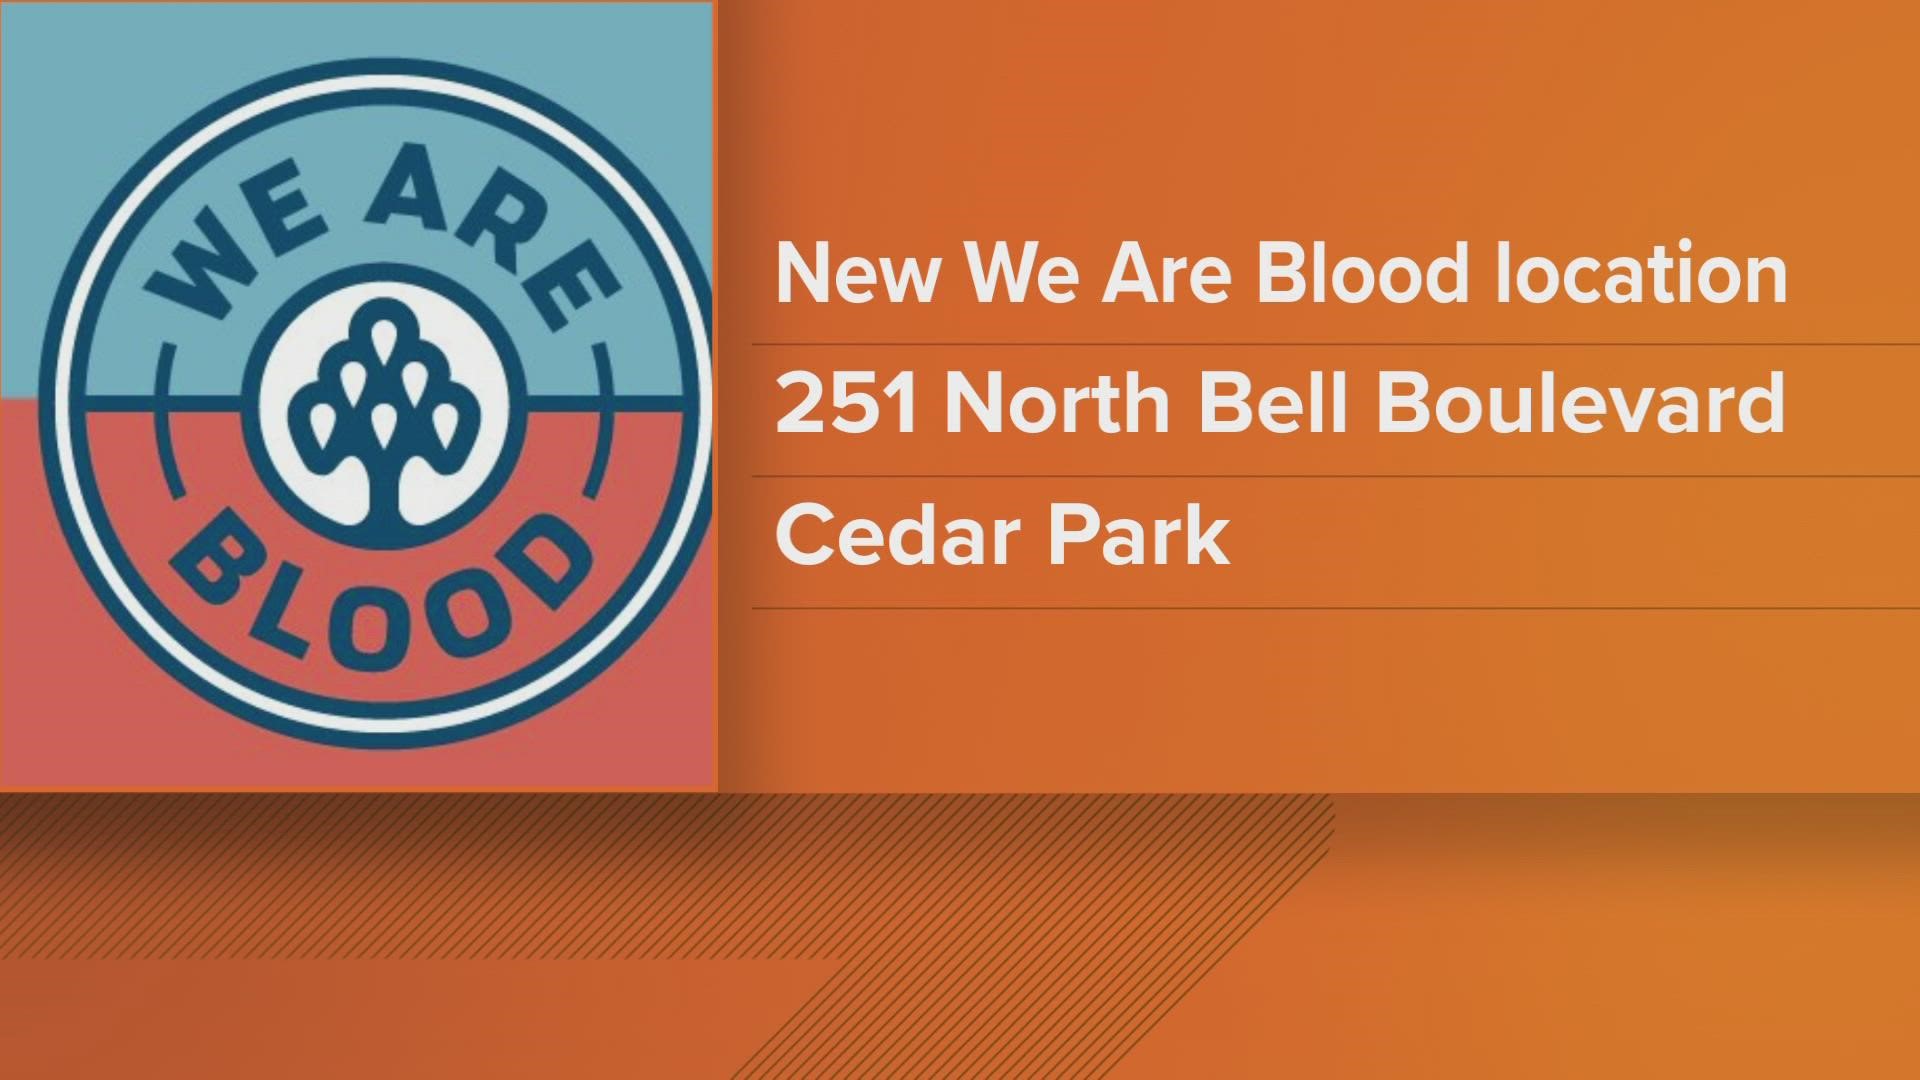 We Are Blood is opening a new location in Cedar Park.